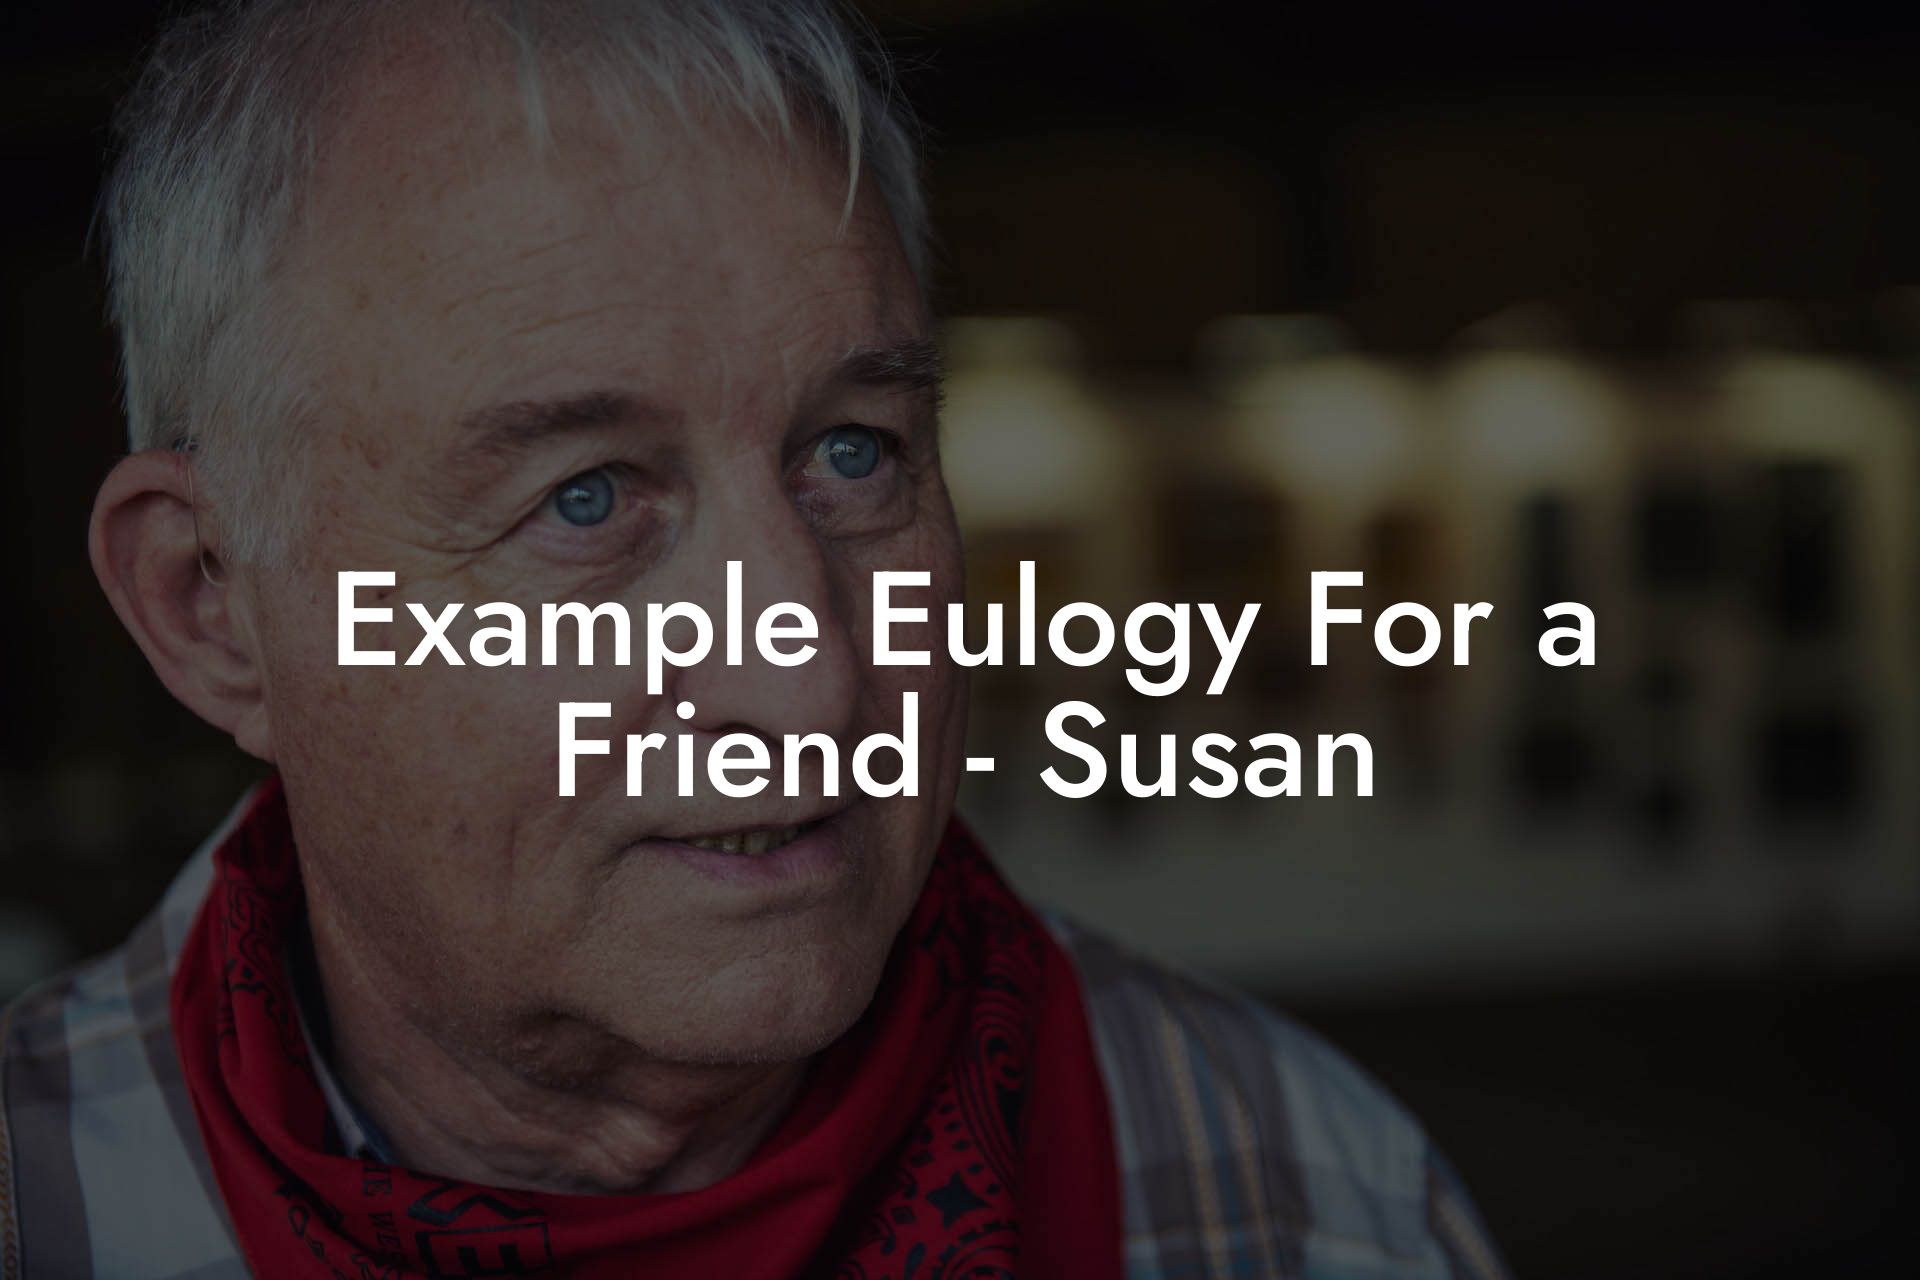 Example Eulogy For a Friend - Susan